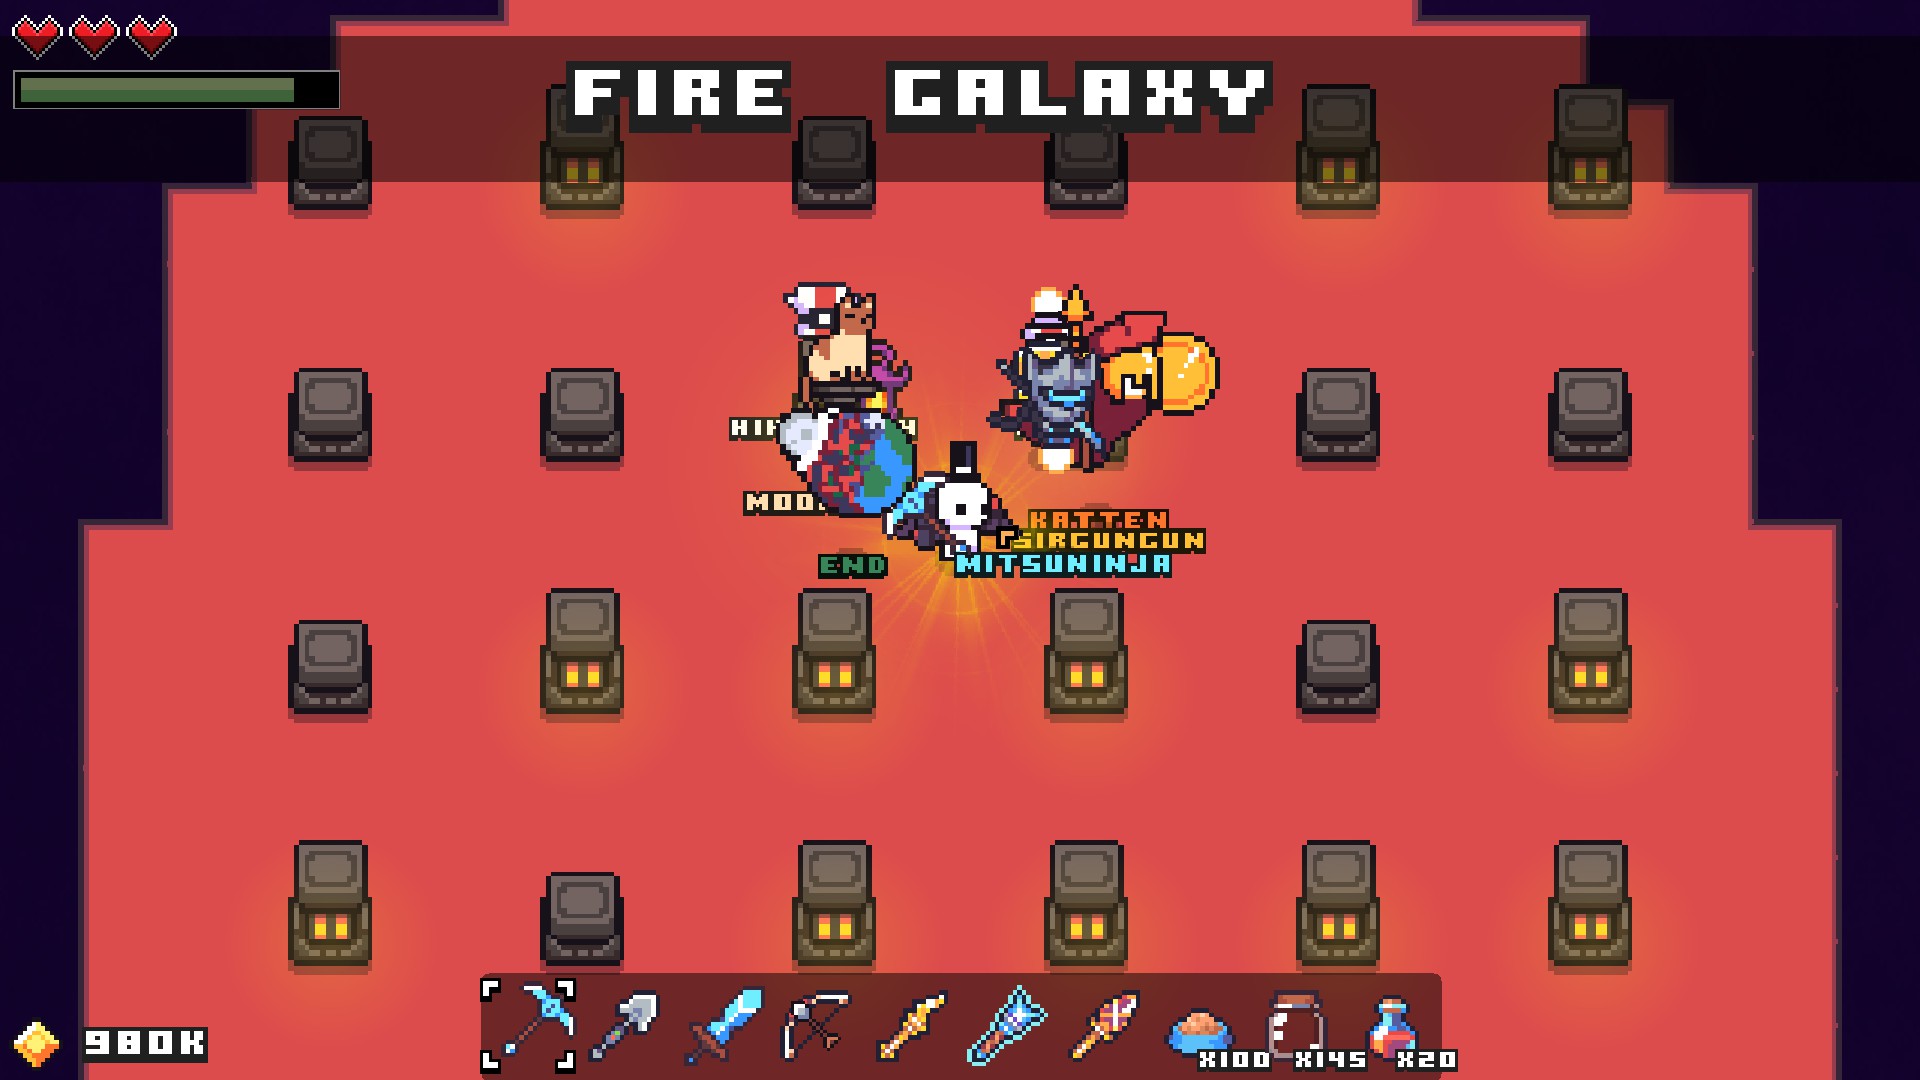 How to Solve the Forager Fire Galaxy